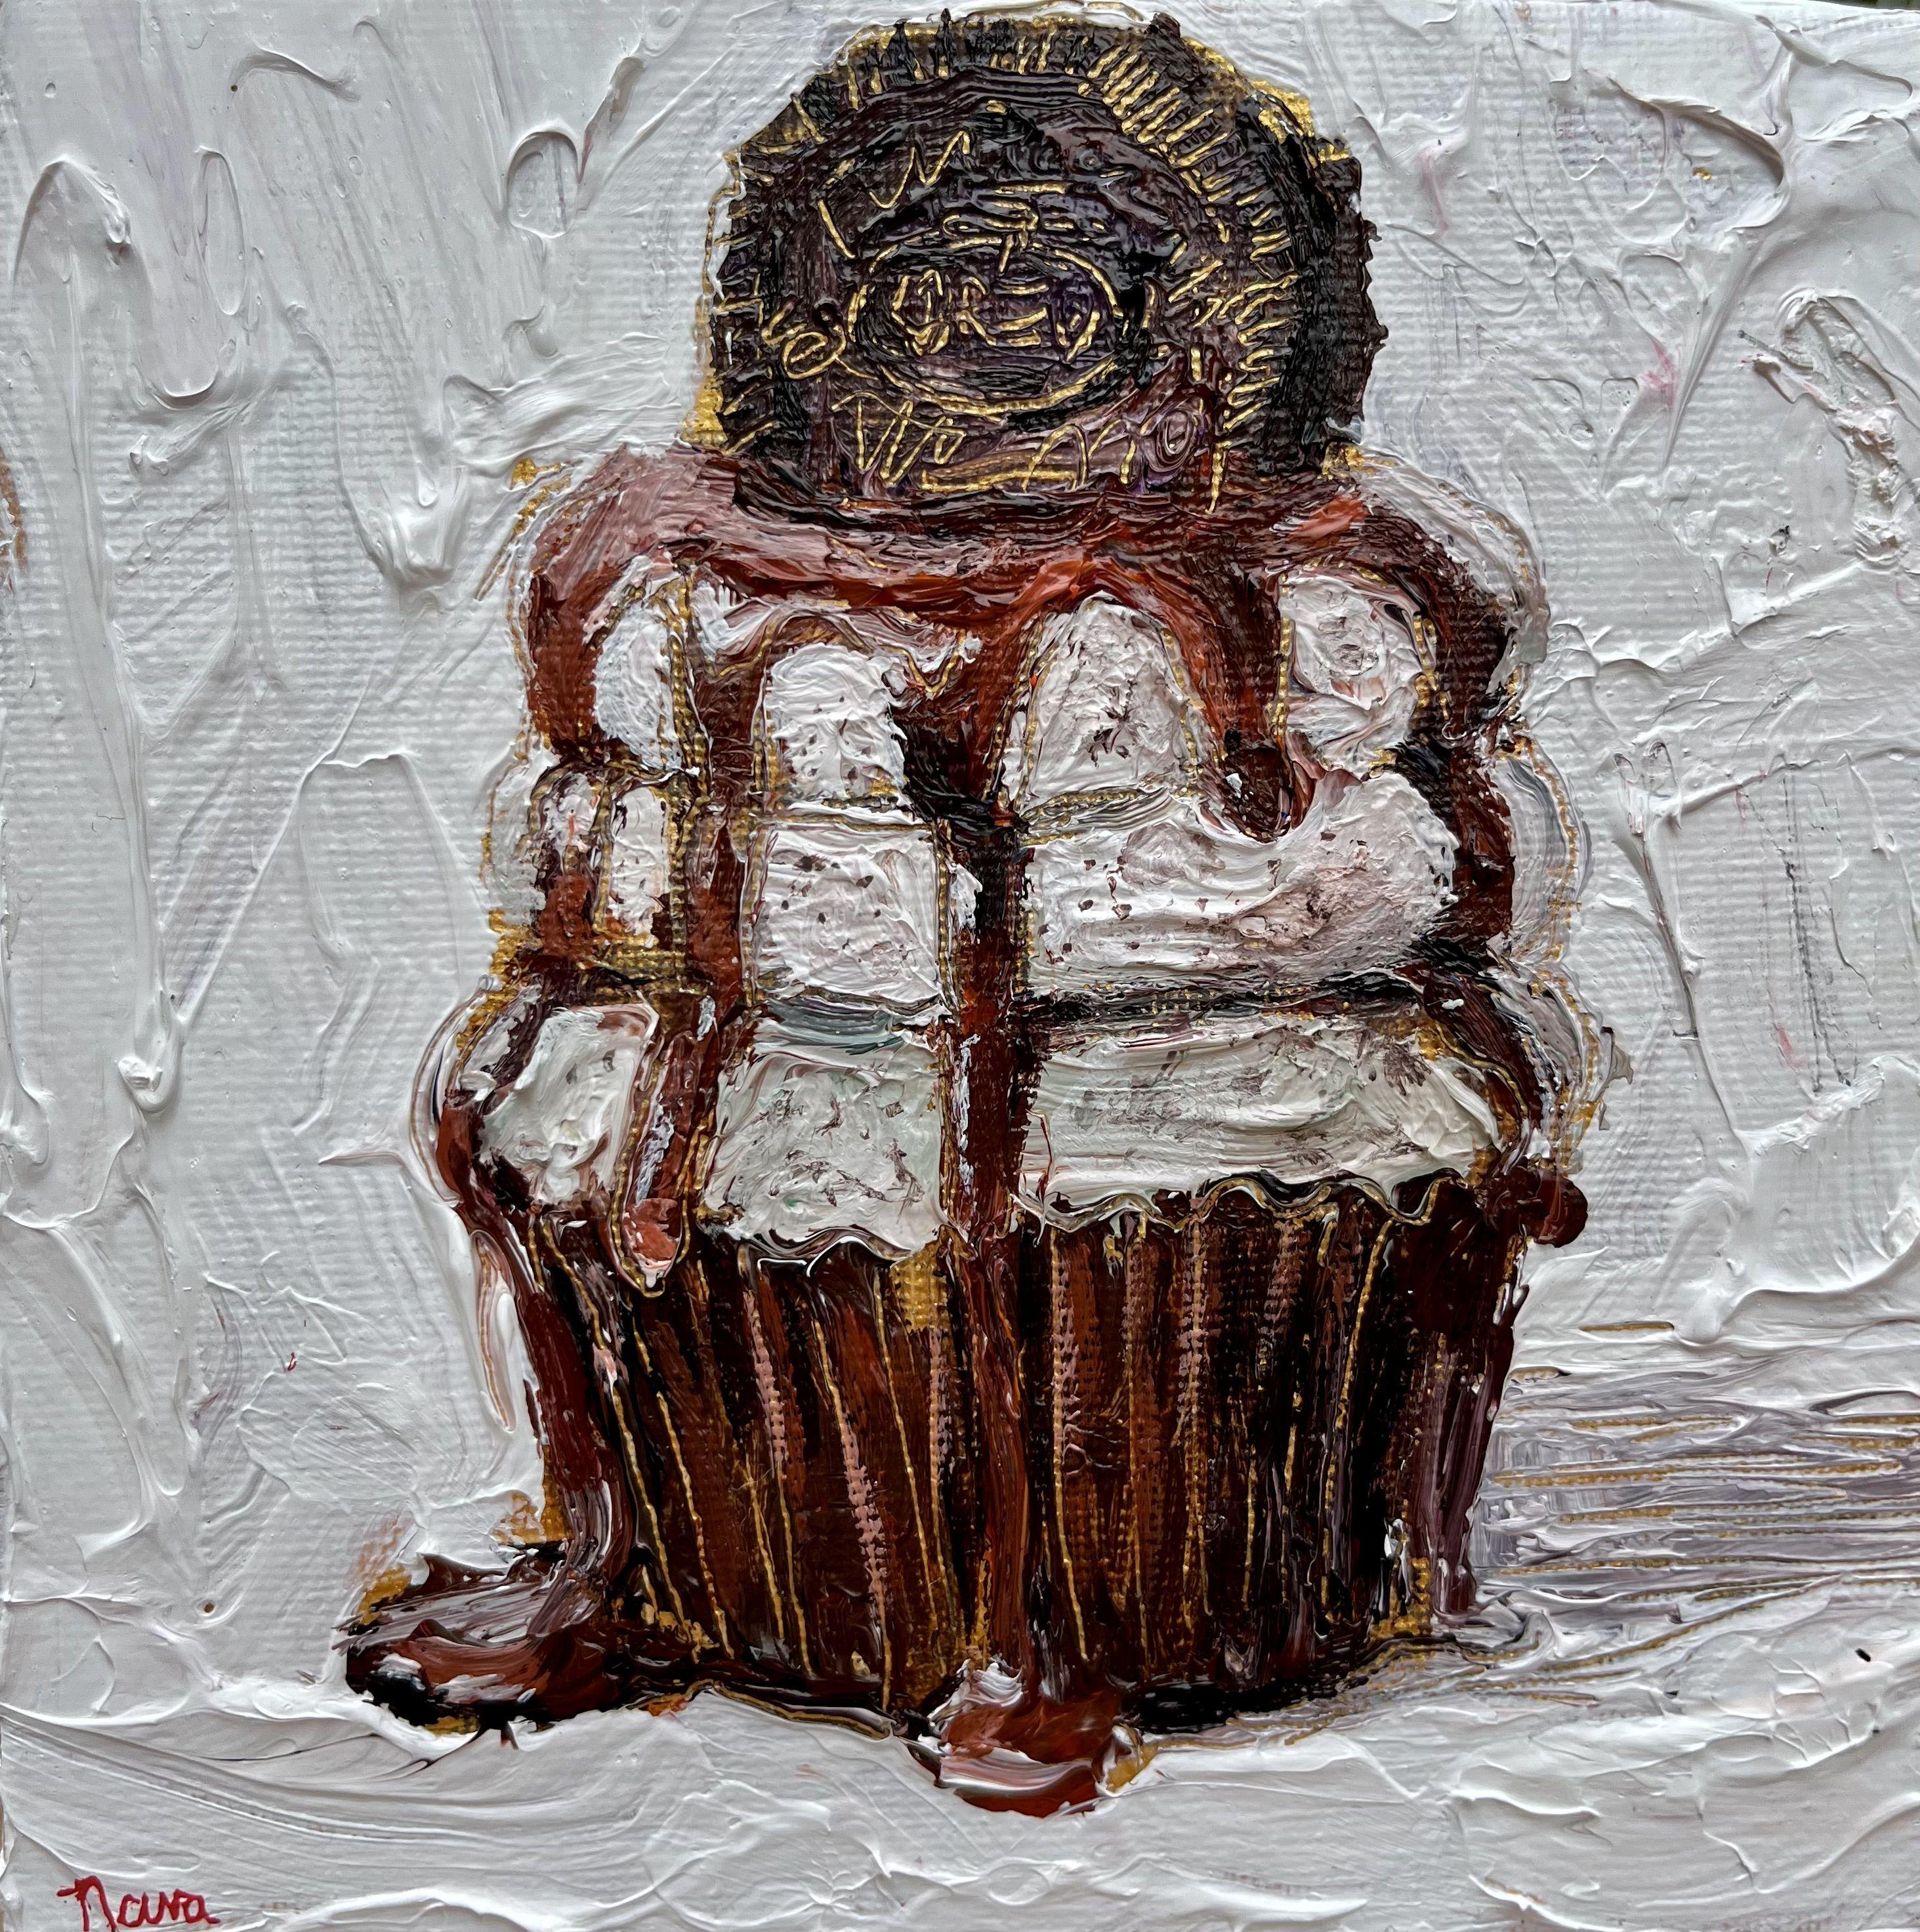 For this cookies and cream cupcake I wanted the syrup to look wet and gooey while the icing flecked with bits of cookie looks rich and thick. And what could be better than a cupcake garnished with an Oreo? :: Painting :: Contemporary :: This piece